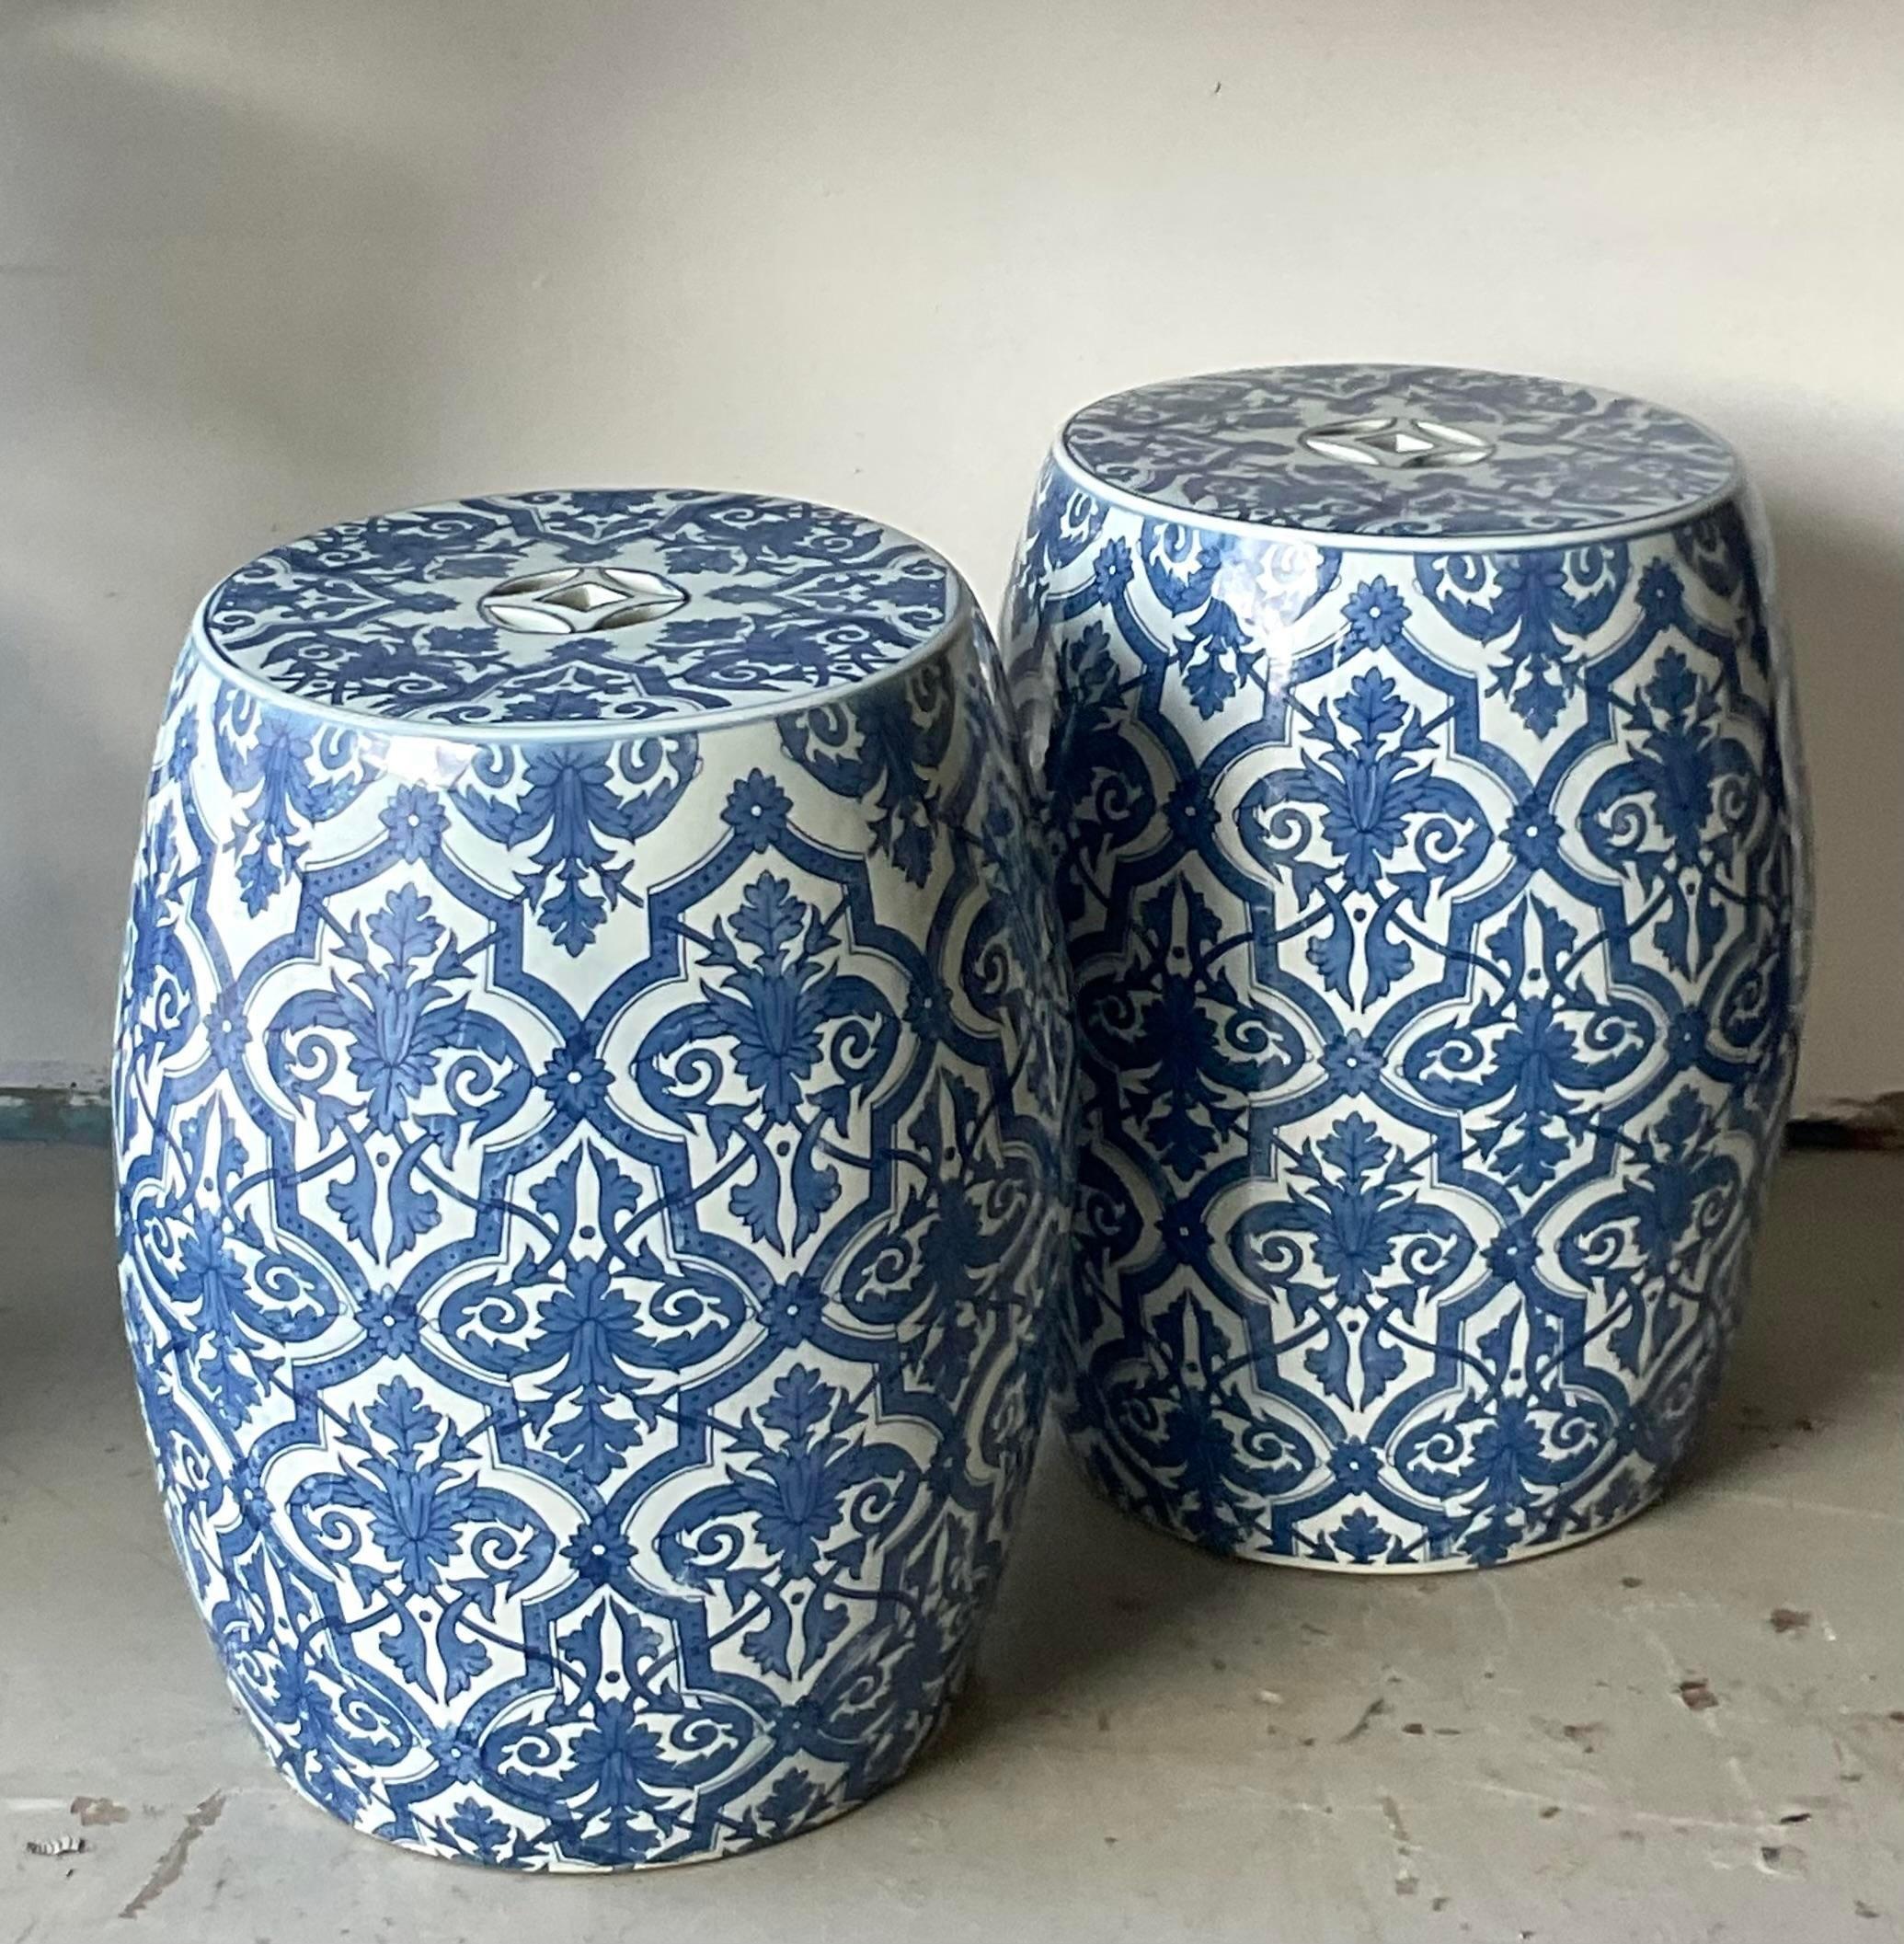 Ceramic Vintage Coastal Blue and White Garden Stools - a Pair For Sale